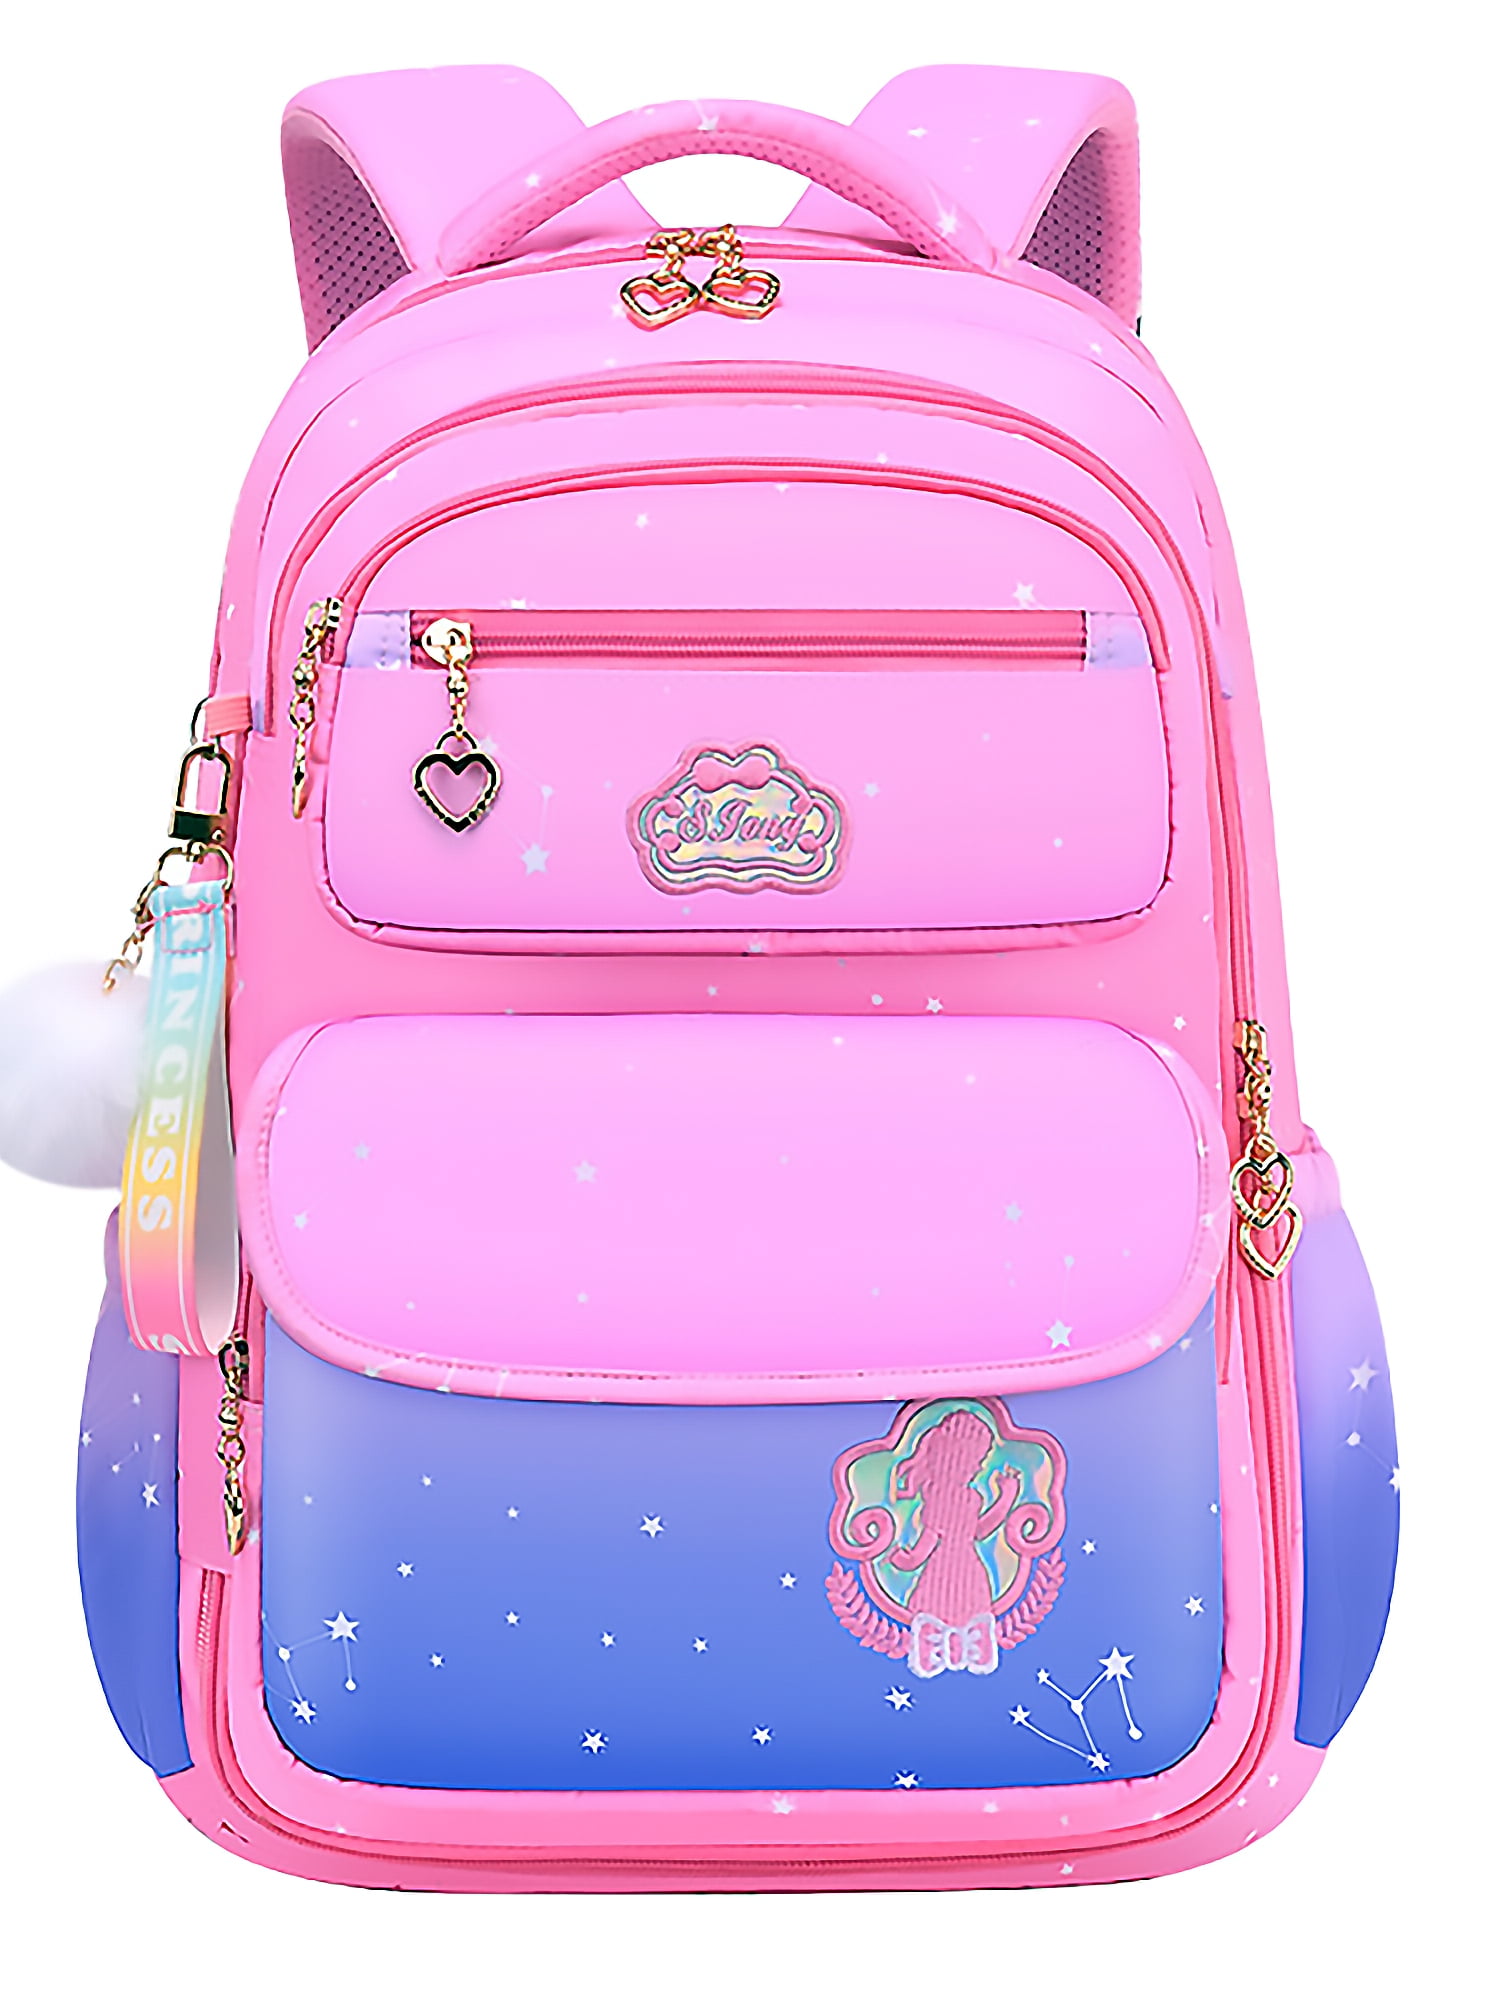 Shreeji Polyester Collage Backpack, Number Of Compartments: 3 Compartments,  Bag Capacity: 10L